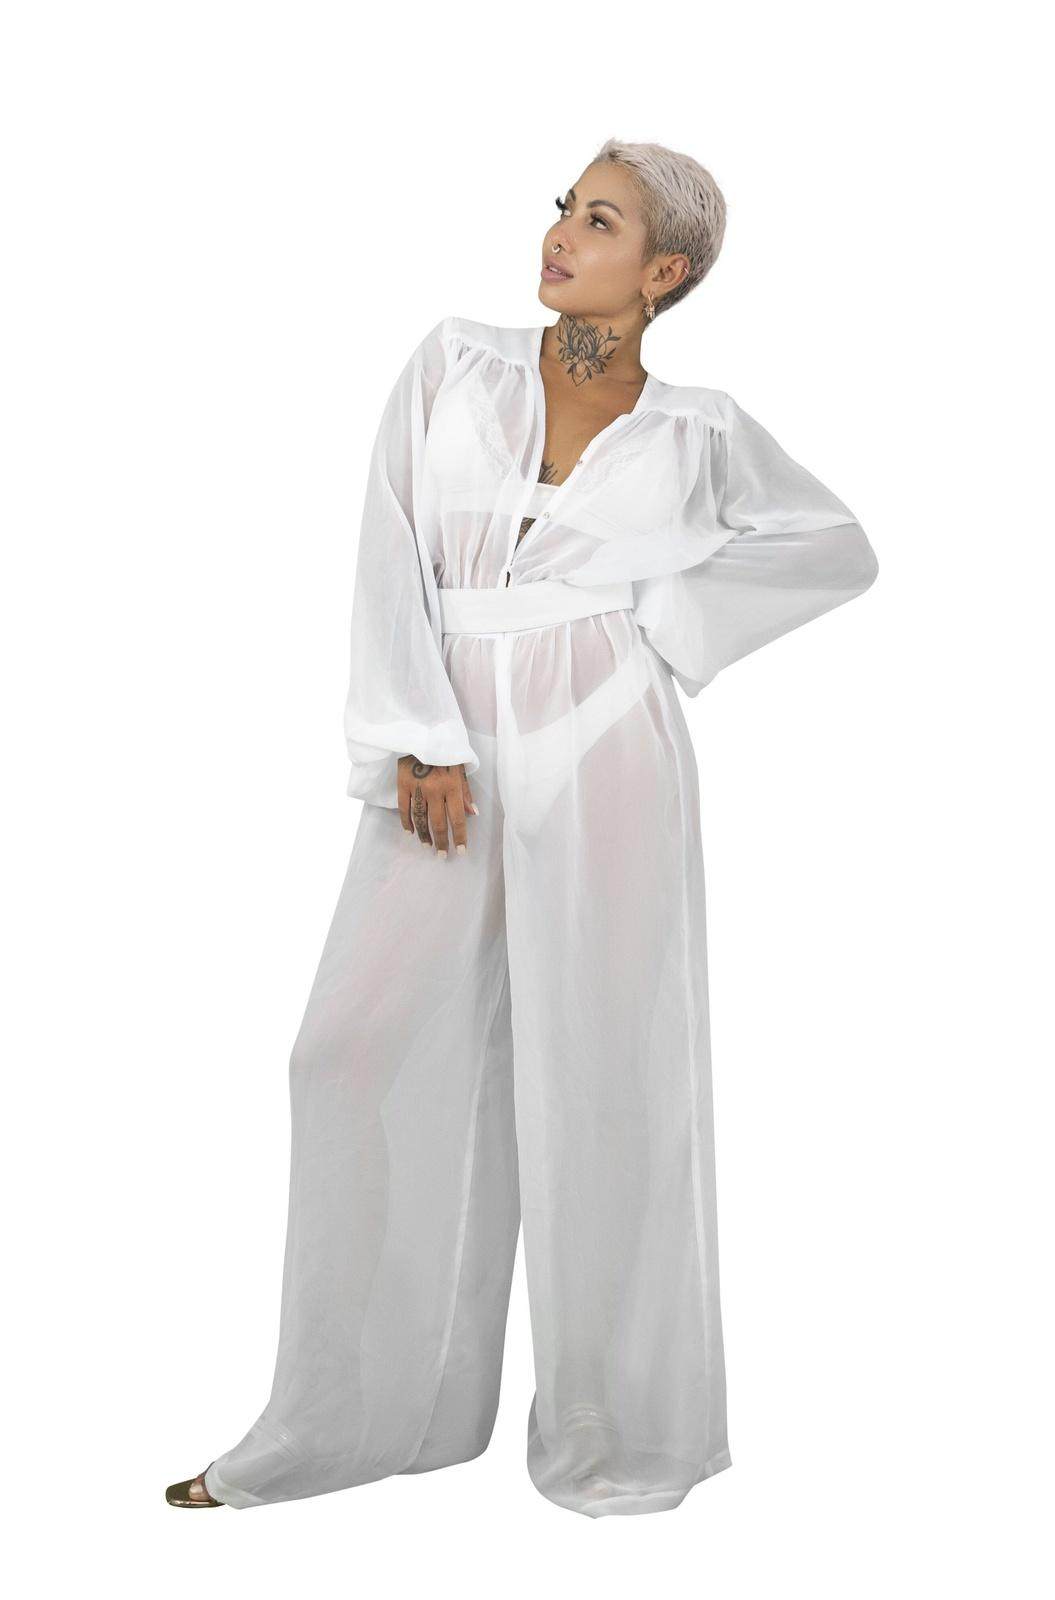 The Oasis Sheer Chiffon Jumpsuit in Porcelain White From Love Khaos Resort Wear Brand.